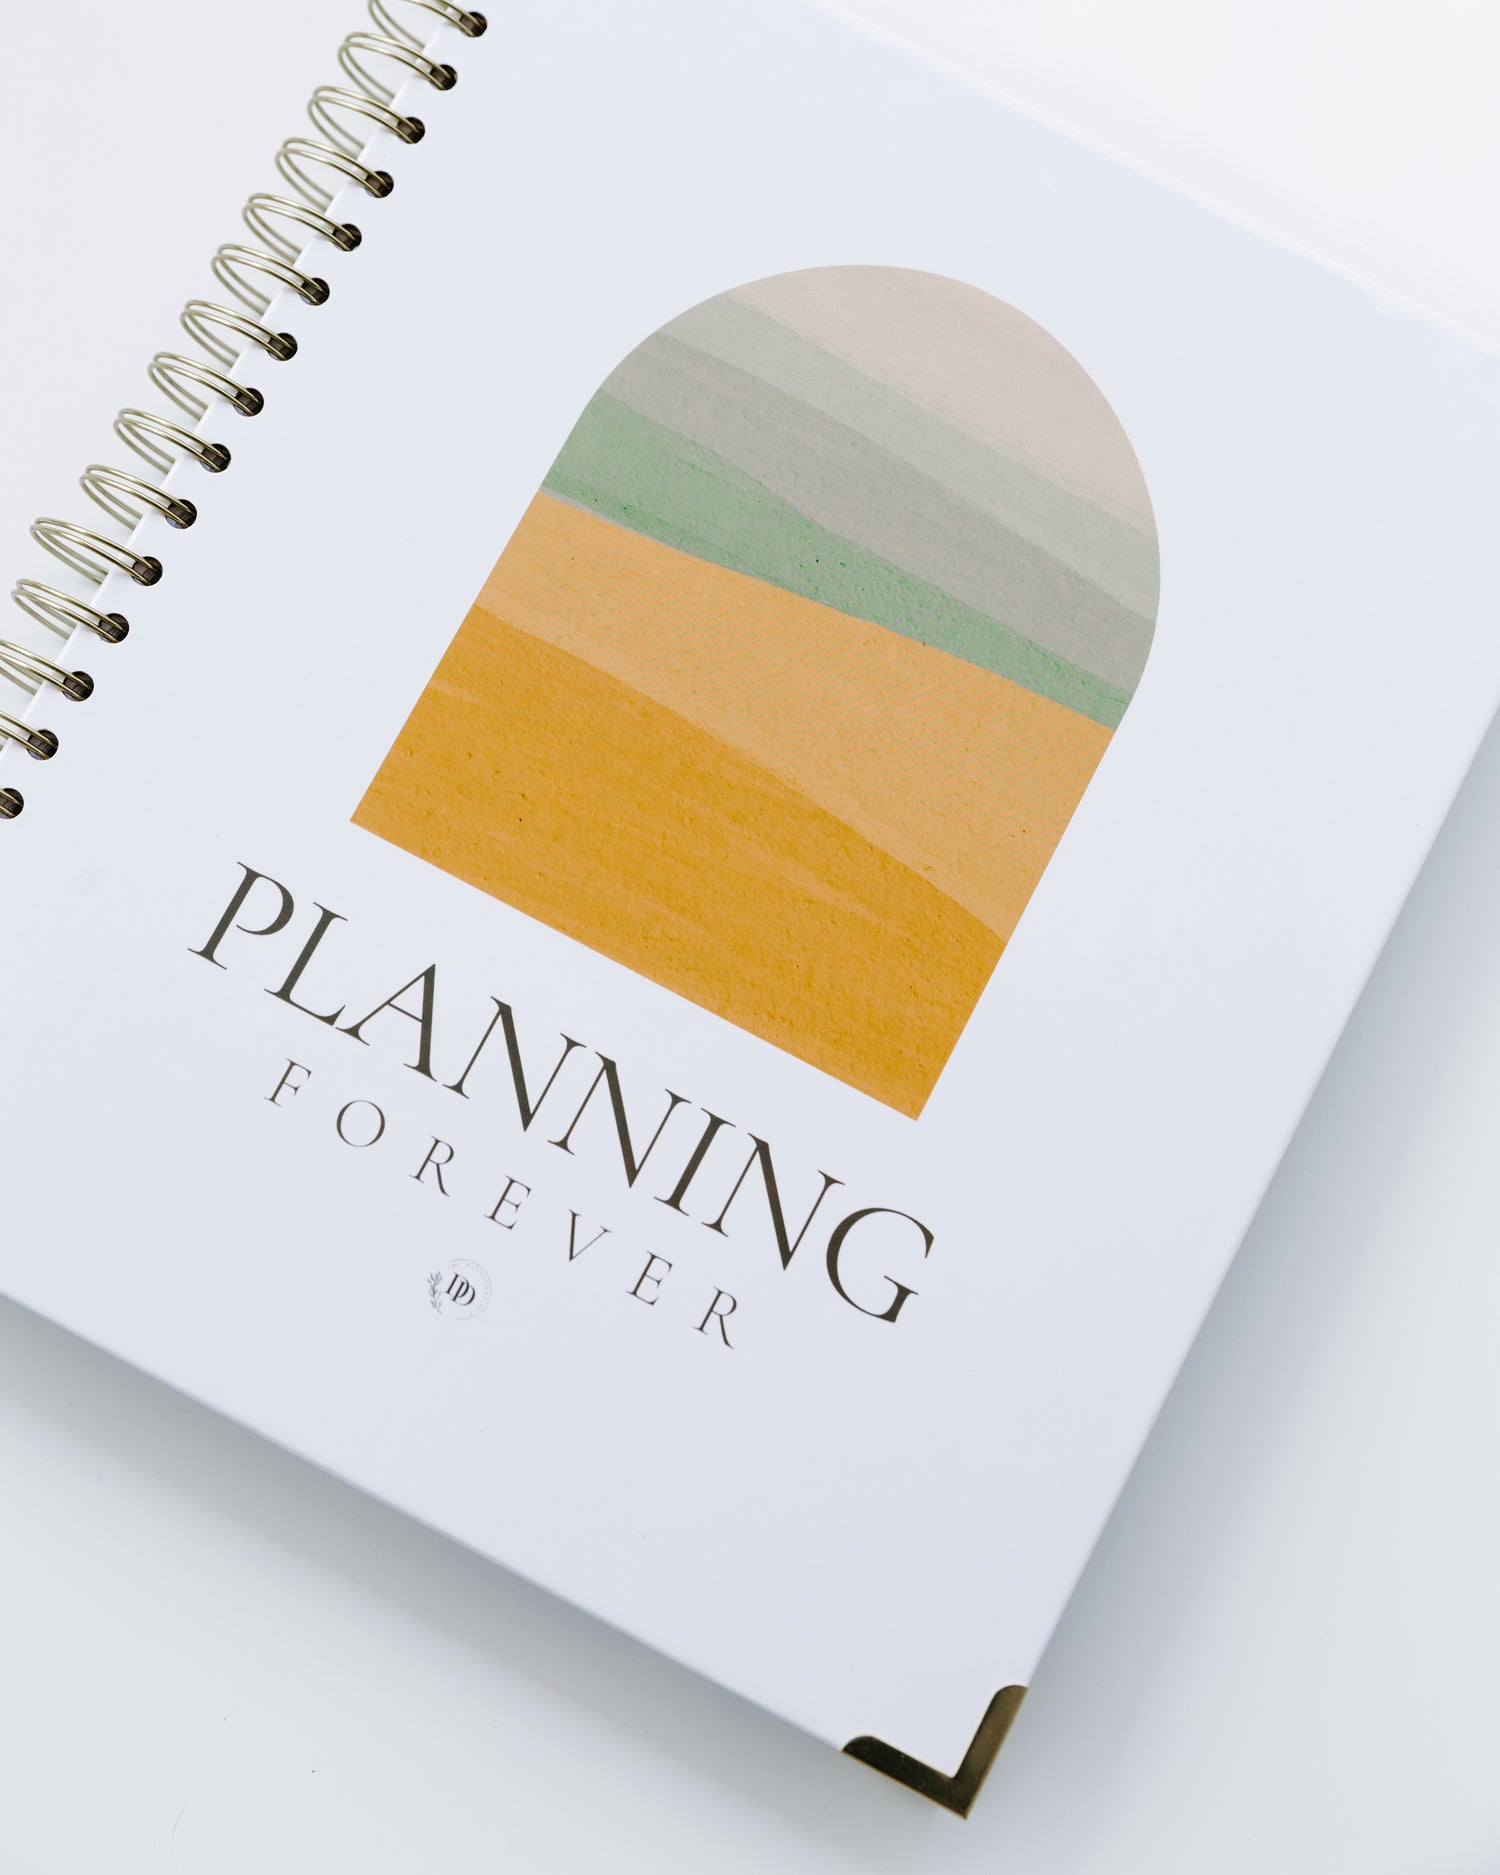 Get the #1 wedding planner today